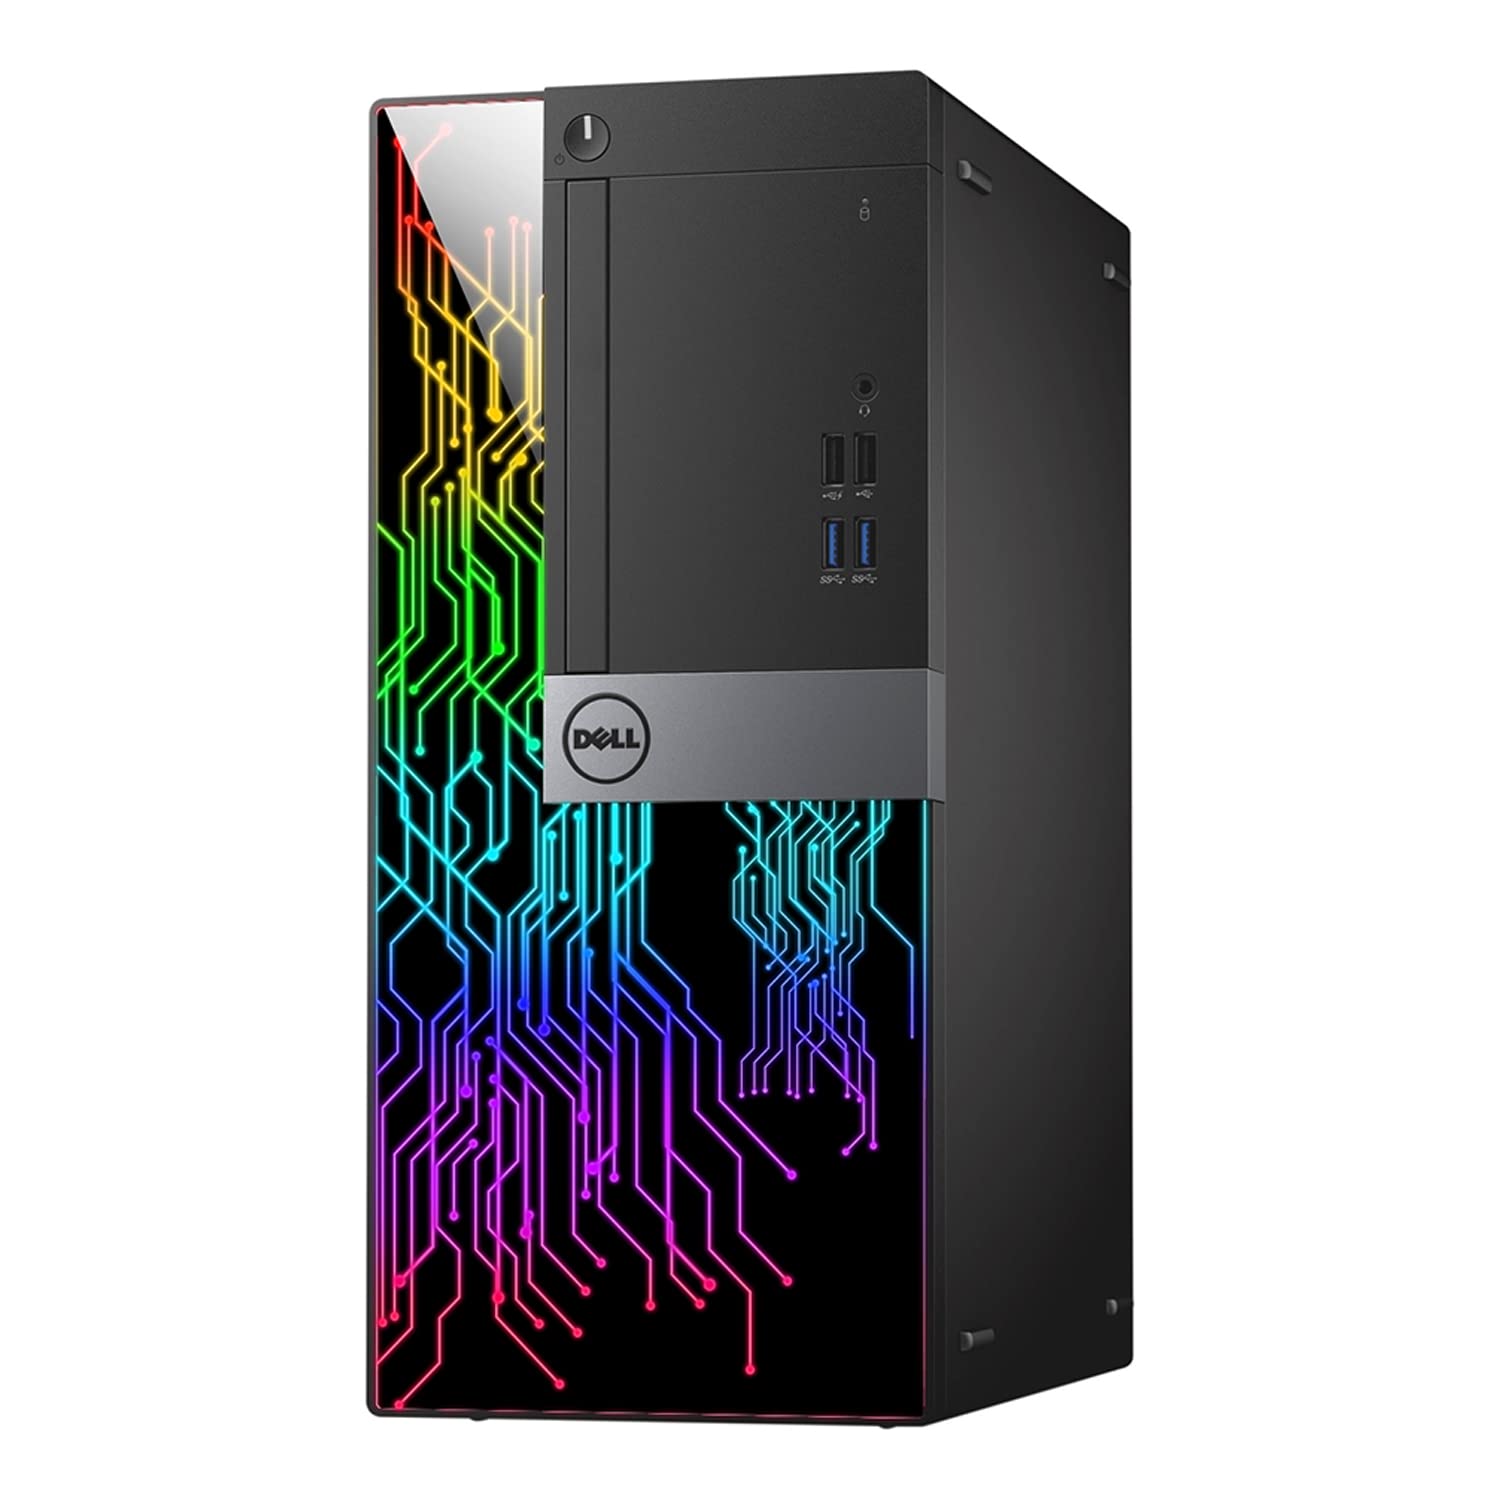 Dell OptiPlex Tower Customized RGB Lights Computer Intel Core i5-6500 Processor up to 3.60 GHz 8GB RAM 256GB Solid State Storage (SSD) Windows 10 Wi-Fi, Keyboard & Mouse HDMI (Renewed)